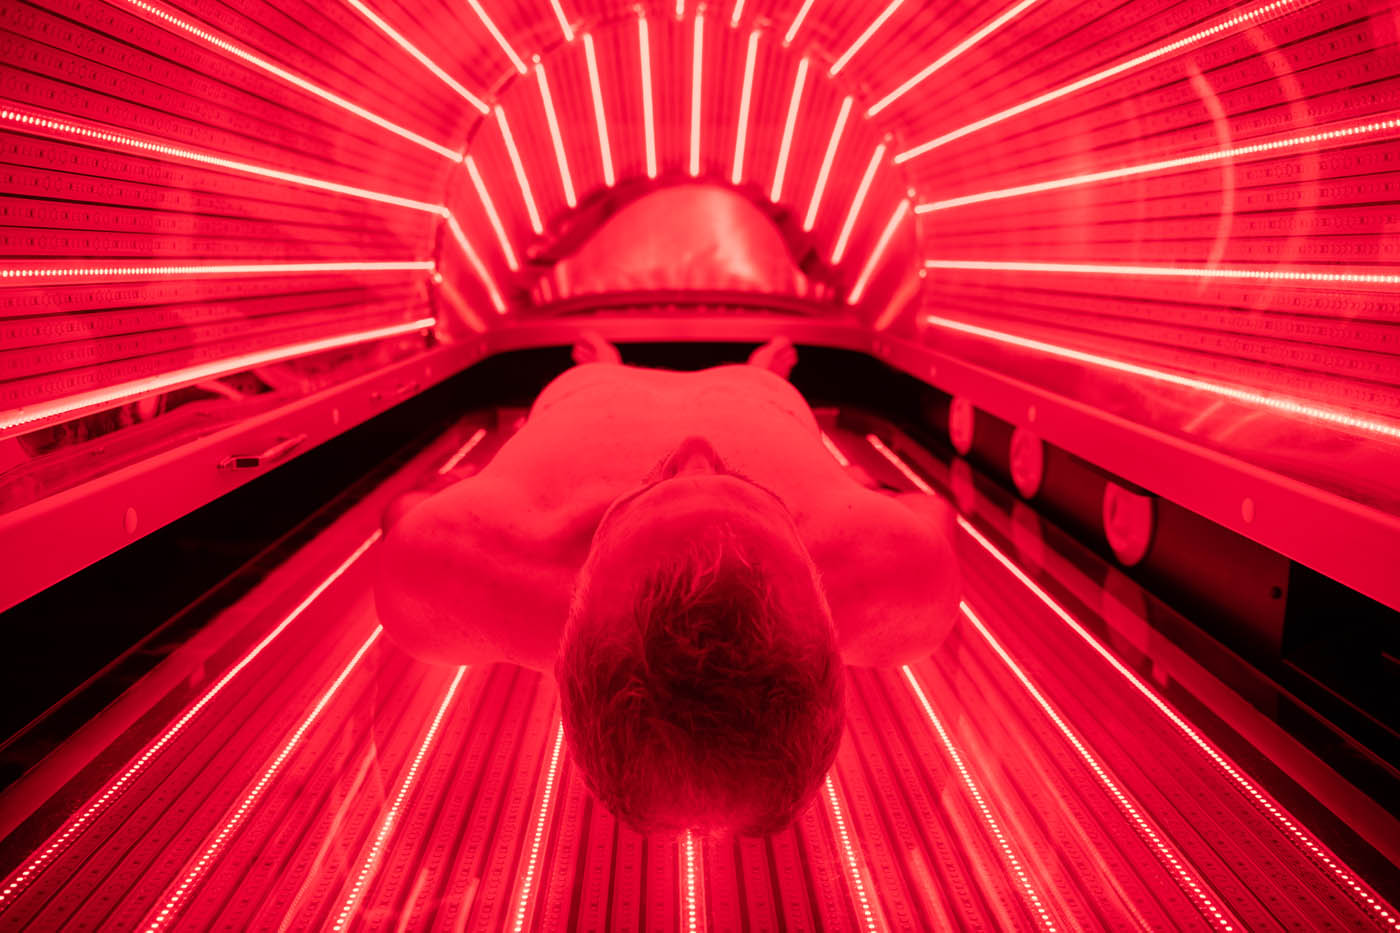 A man getting into a dark pod with bright red light, contact Light Lounge today for your infrared light therapy near you.